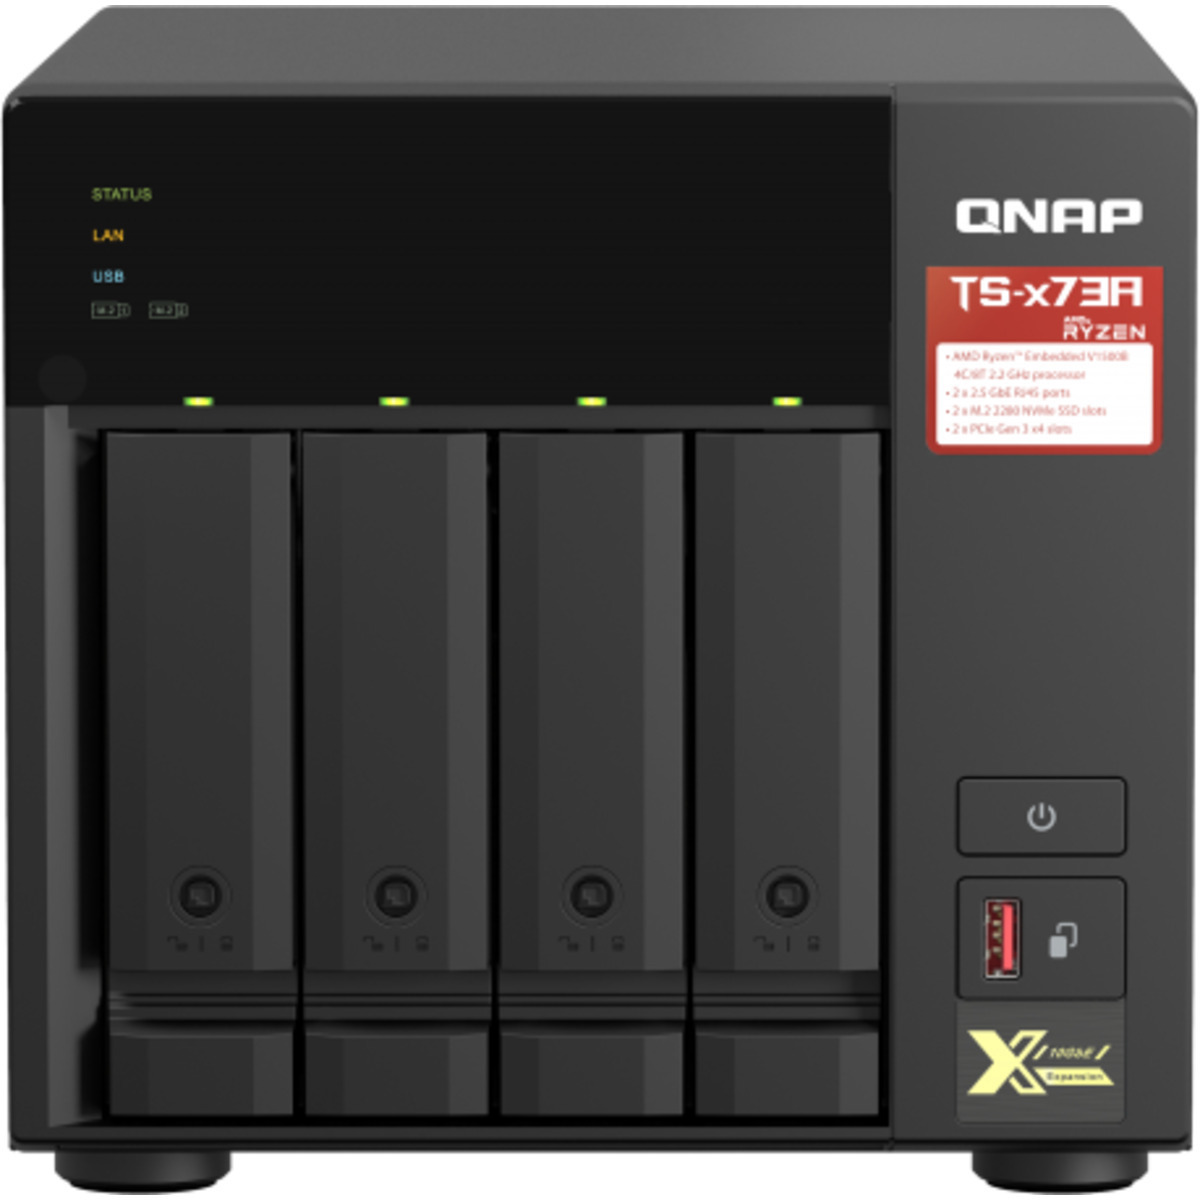 QNAP TS-473A 32tb 4-Bay Desktop Multimedia / Power User / Business NAS - Network Attached Storage Device 4x8tb Western Digital Red Plus WD80EFPX 3.5 7200rpm SATA 6Gb/s HDD NAS Class Drives Installed - Burn-In Tested TS-473A